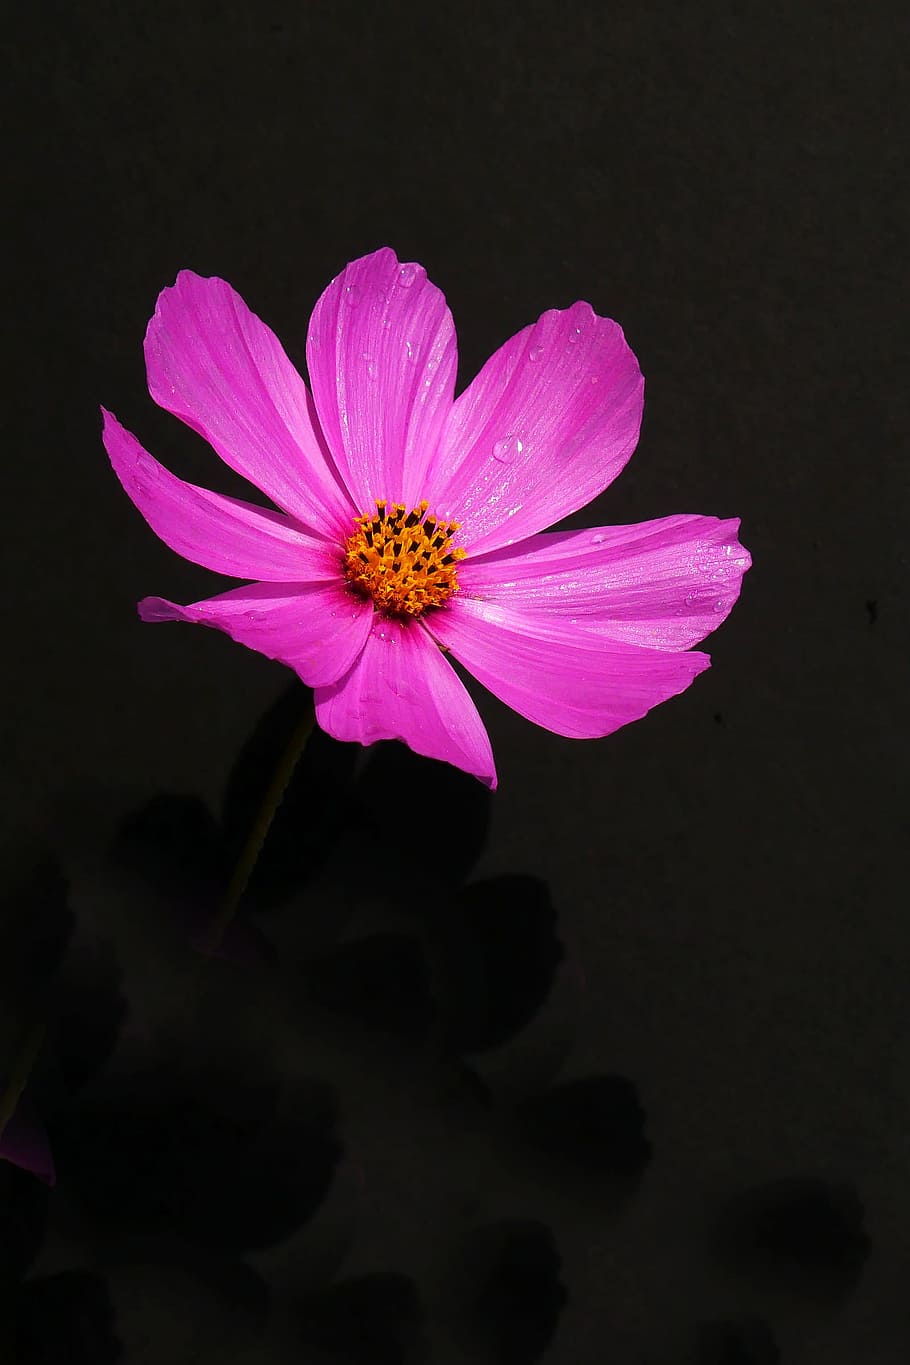 pink, cosmos flower, closeup., cosmos plant, pink flowers, pictures of flowers, flower images, flowers photos, flowers image, beautiful flowers images